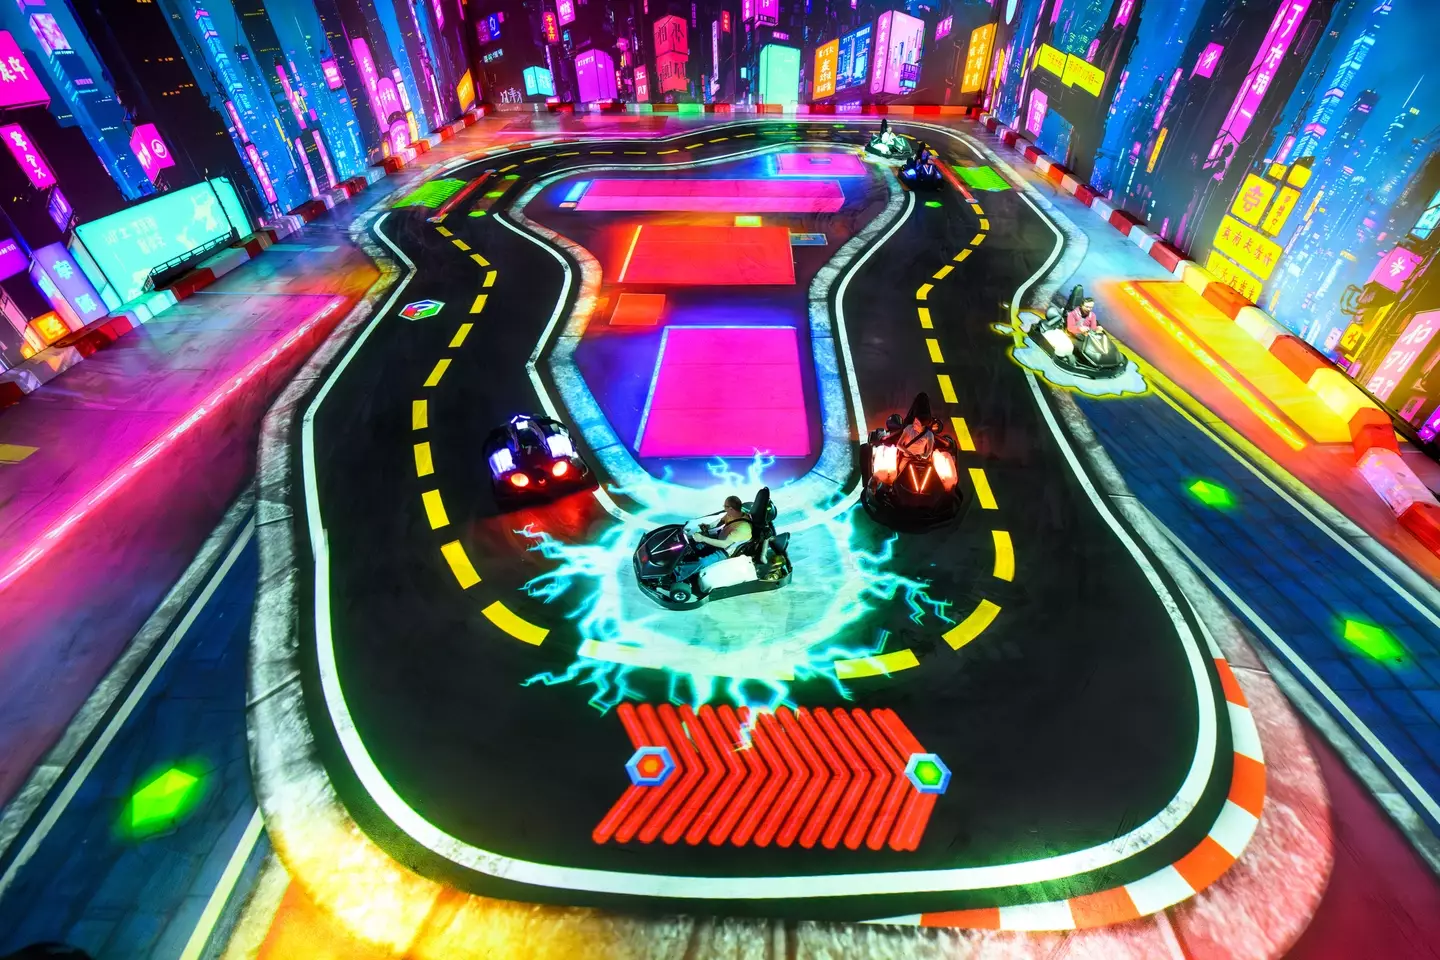 Chaos Karts takes gaming to the next level